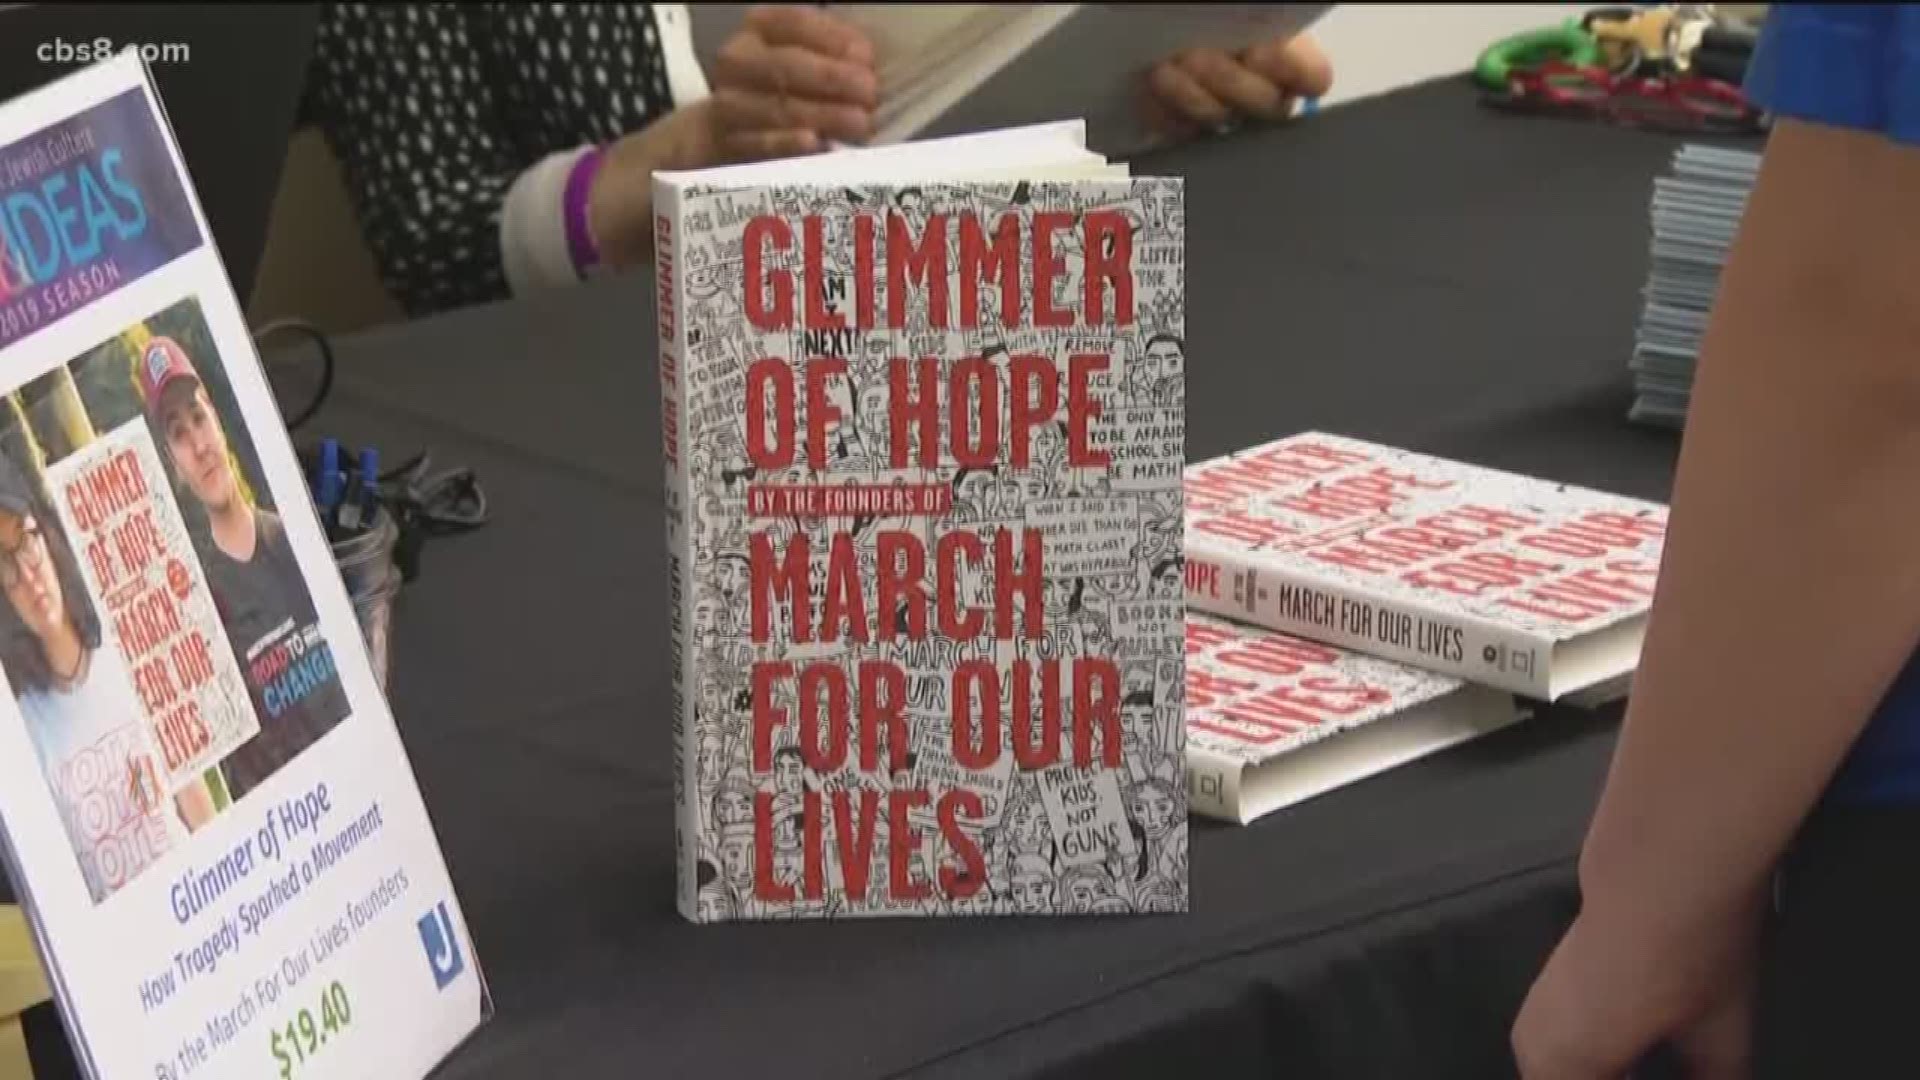 "Glimmer of Hope," a series of essays, chronicles the launch of March for Our Lives, a movement to call for stricter gun control measures and an end mass shootings.